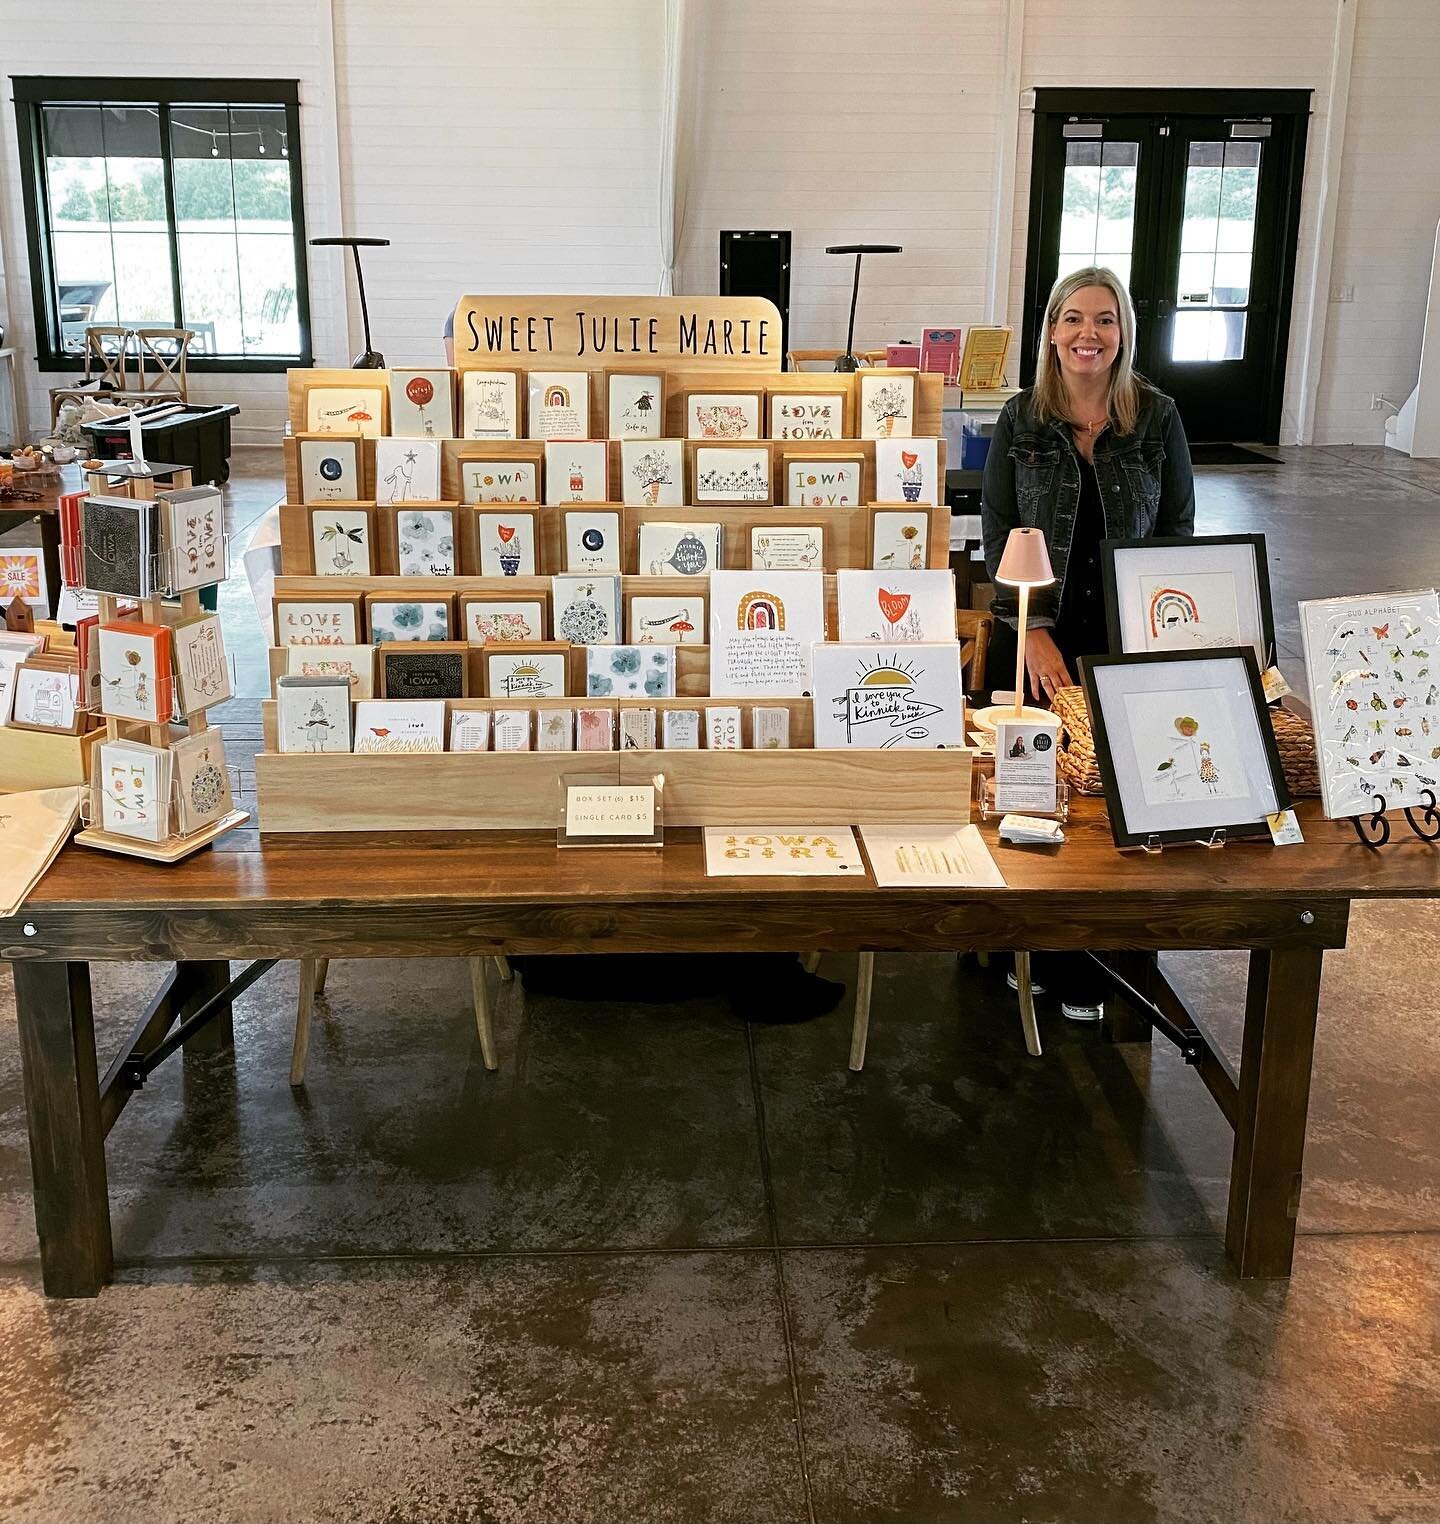 Thank you again to all who came to @thelocalgrovemarket this past Sunday. I enjoyed meeting new vendors, makers, customers, and taking home some goodies (One of my favorite parts of doing markets)! Special thanks to my Dad, for building such an aweso